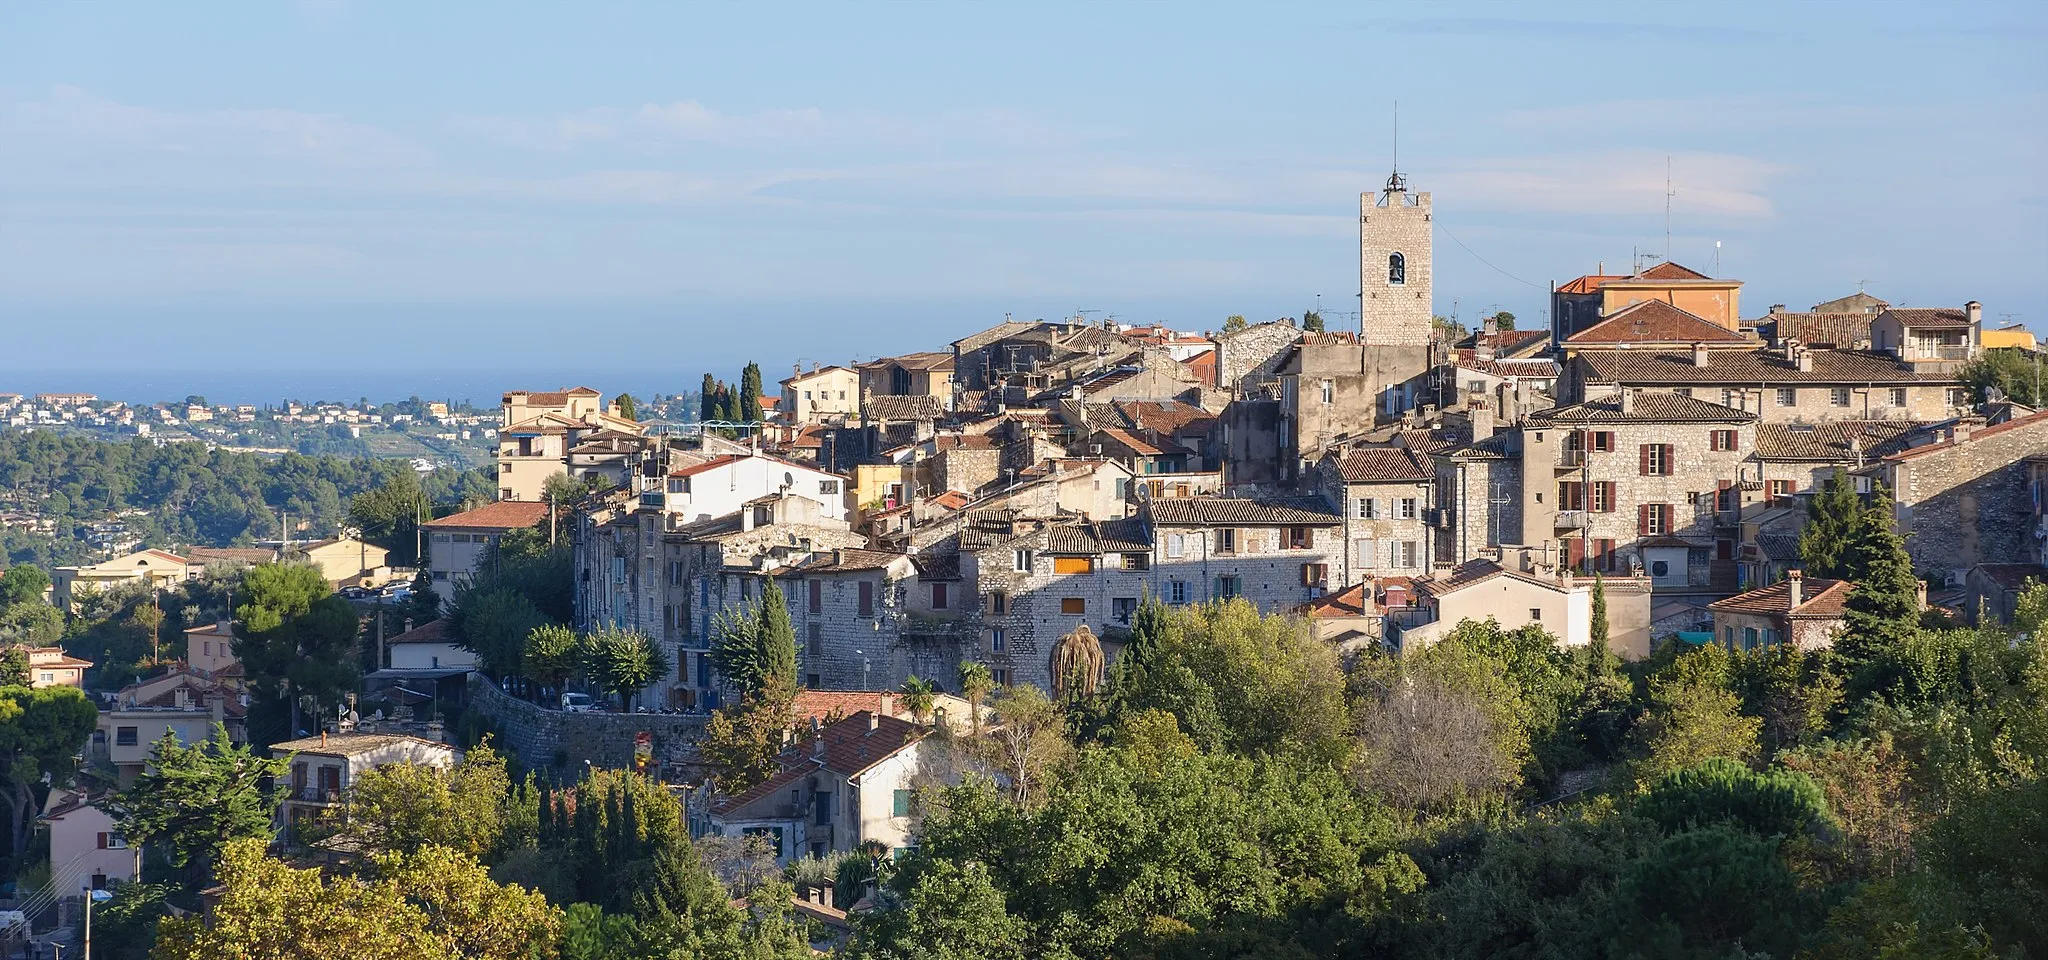 Photo showing: Vence, Alpes-Maritimes, France. In the background, the Mediterranean Sea.